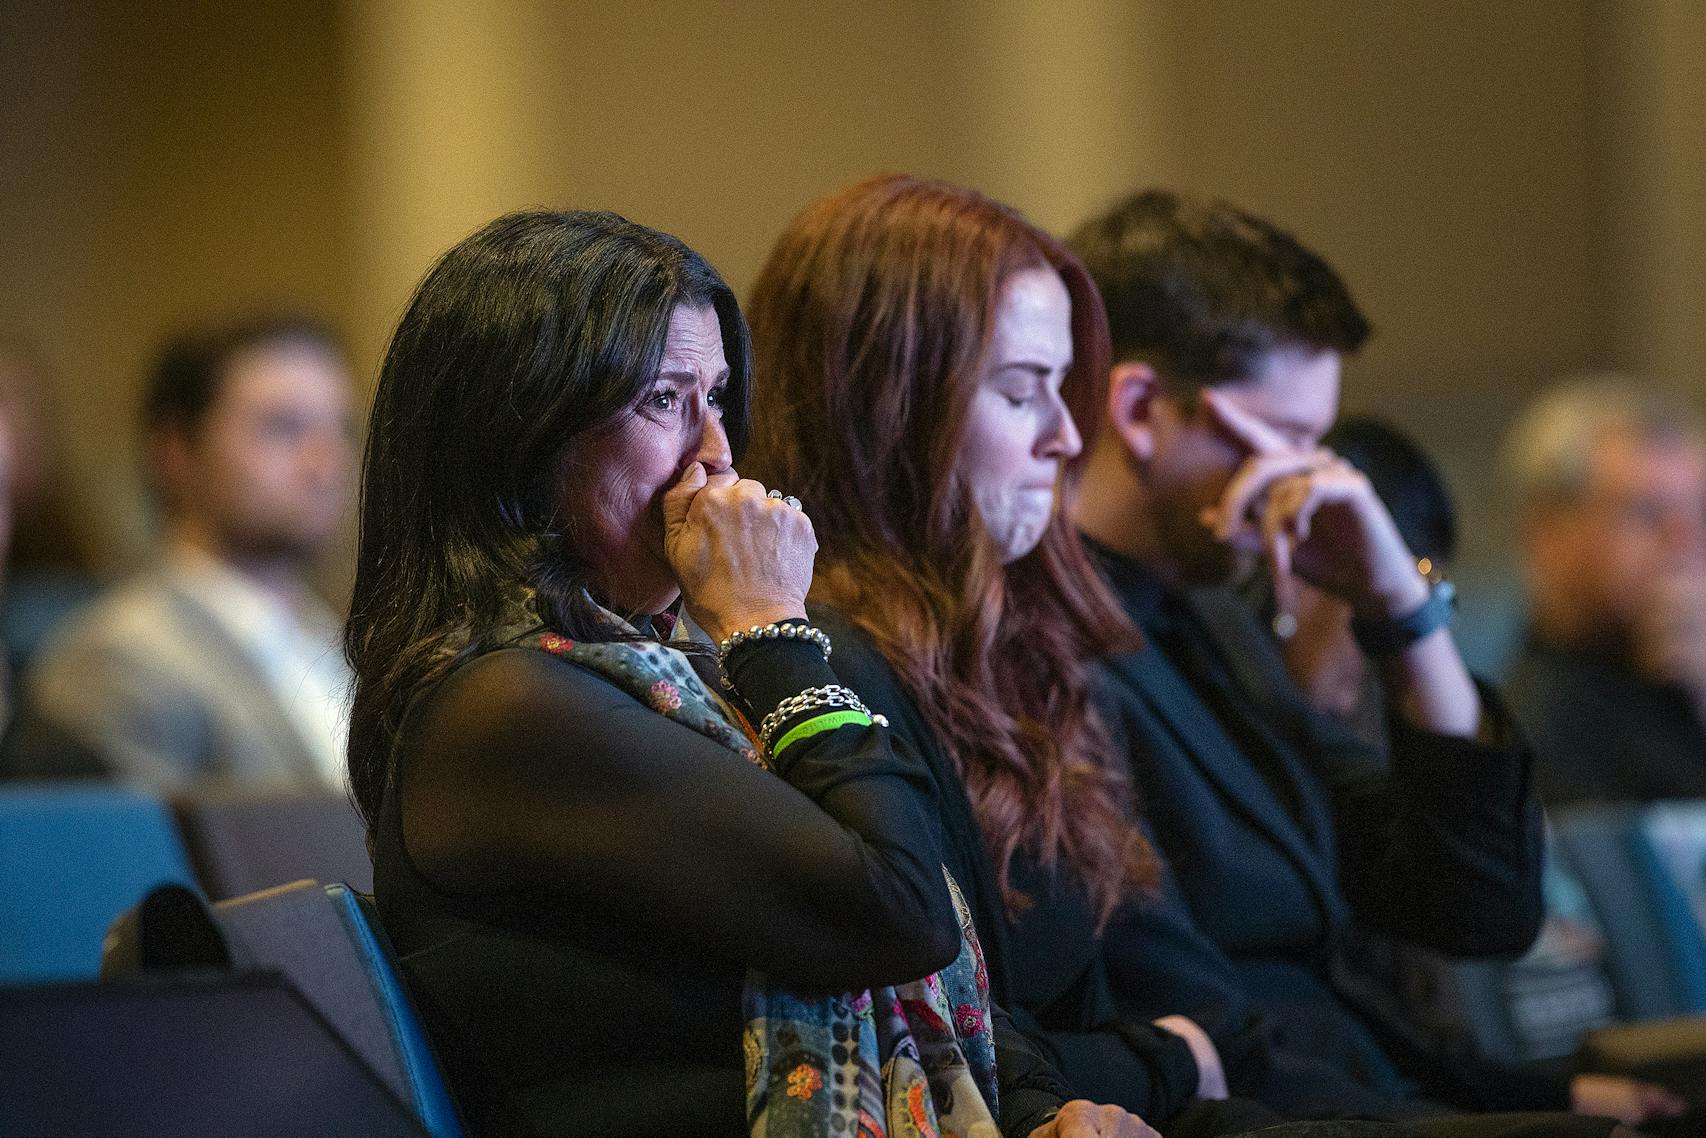 Deirdre Johnson, left, and her daughter Danika cried as they listened to Serena's father pay tribute during her memorial service in March. Serena Johnson died of a fentanyl overdose at 23.